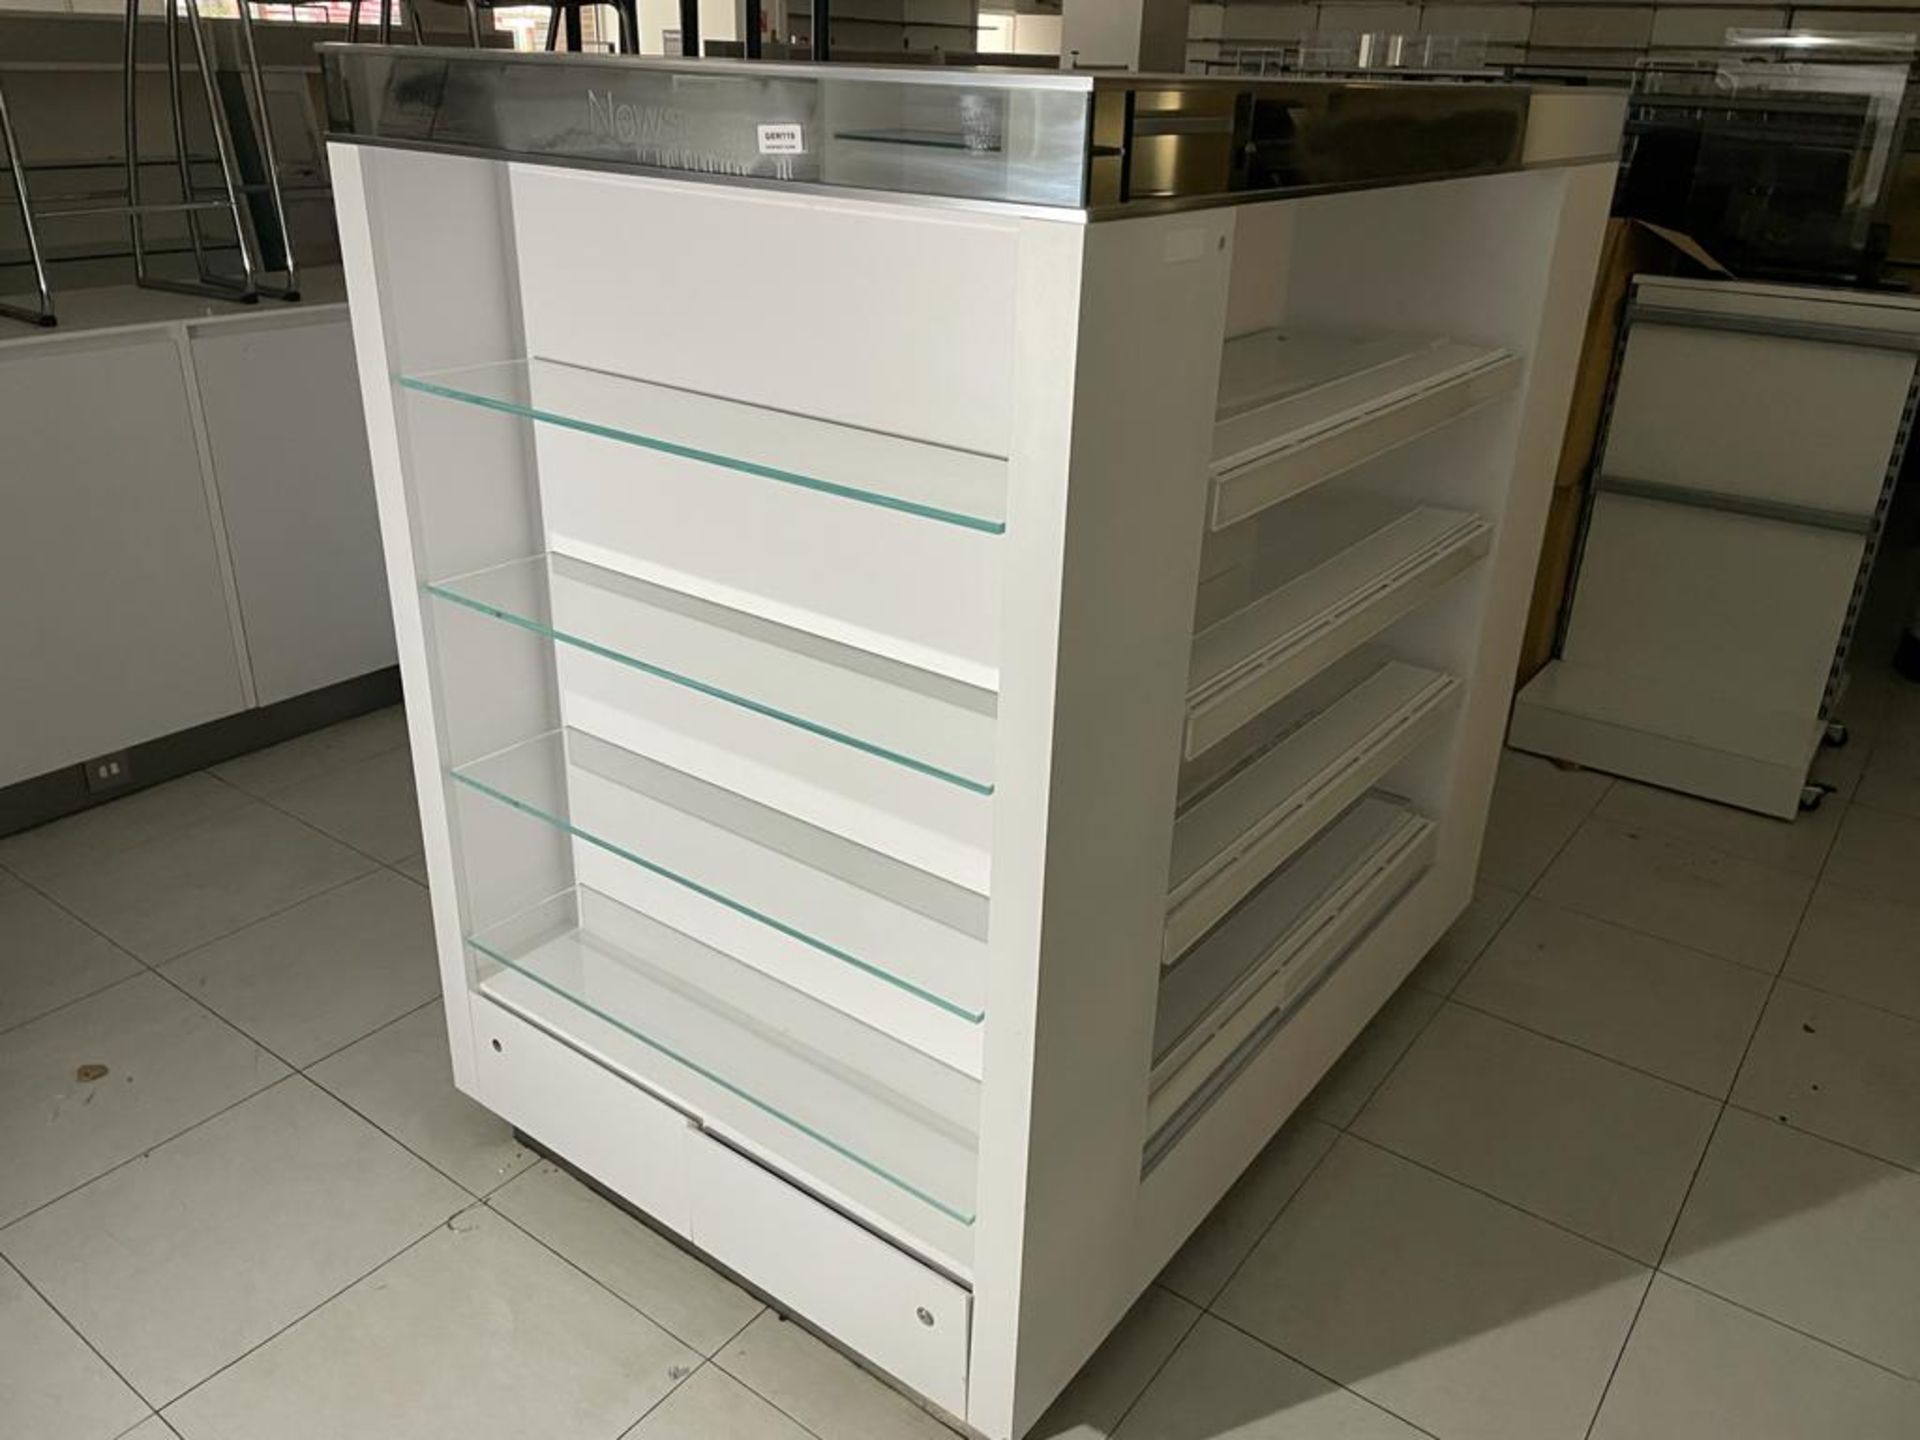 1 x Retail Four Sided Display Island With Shelves, Storage Drawers and Mirrored Panels - Size H150 x - Image 9 of 10